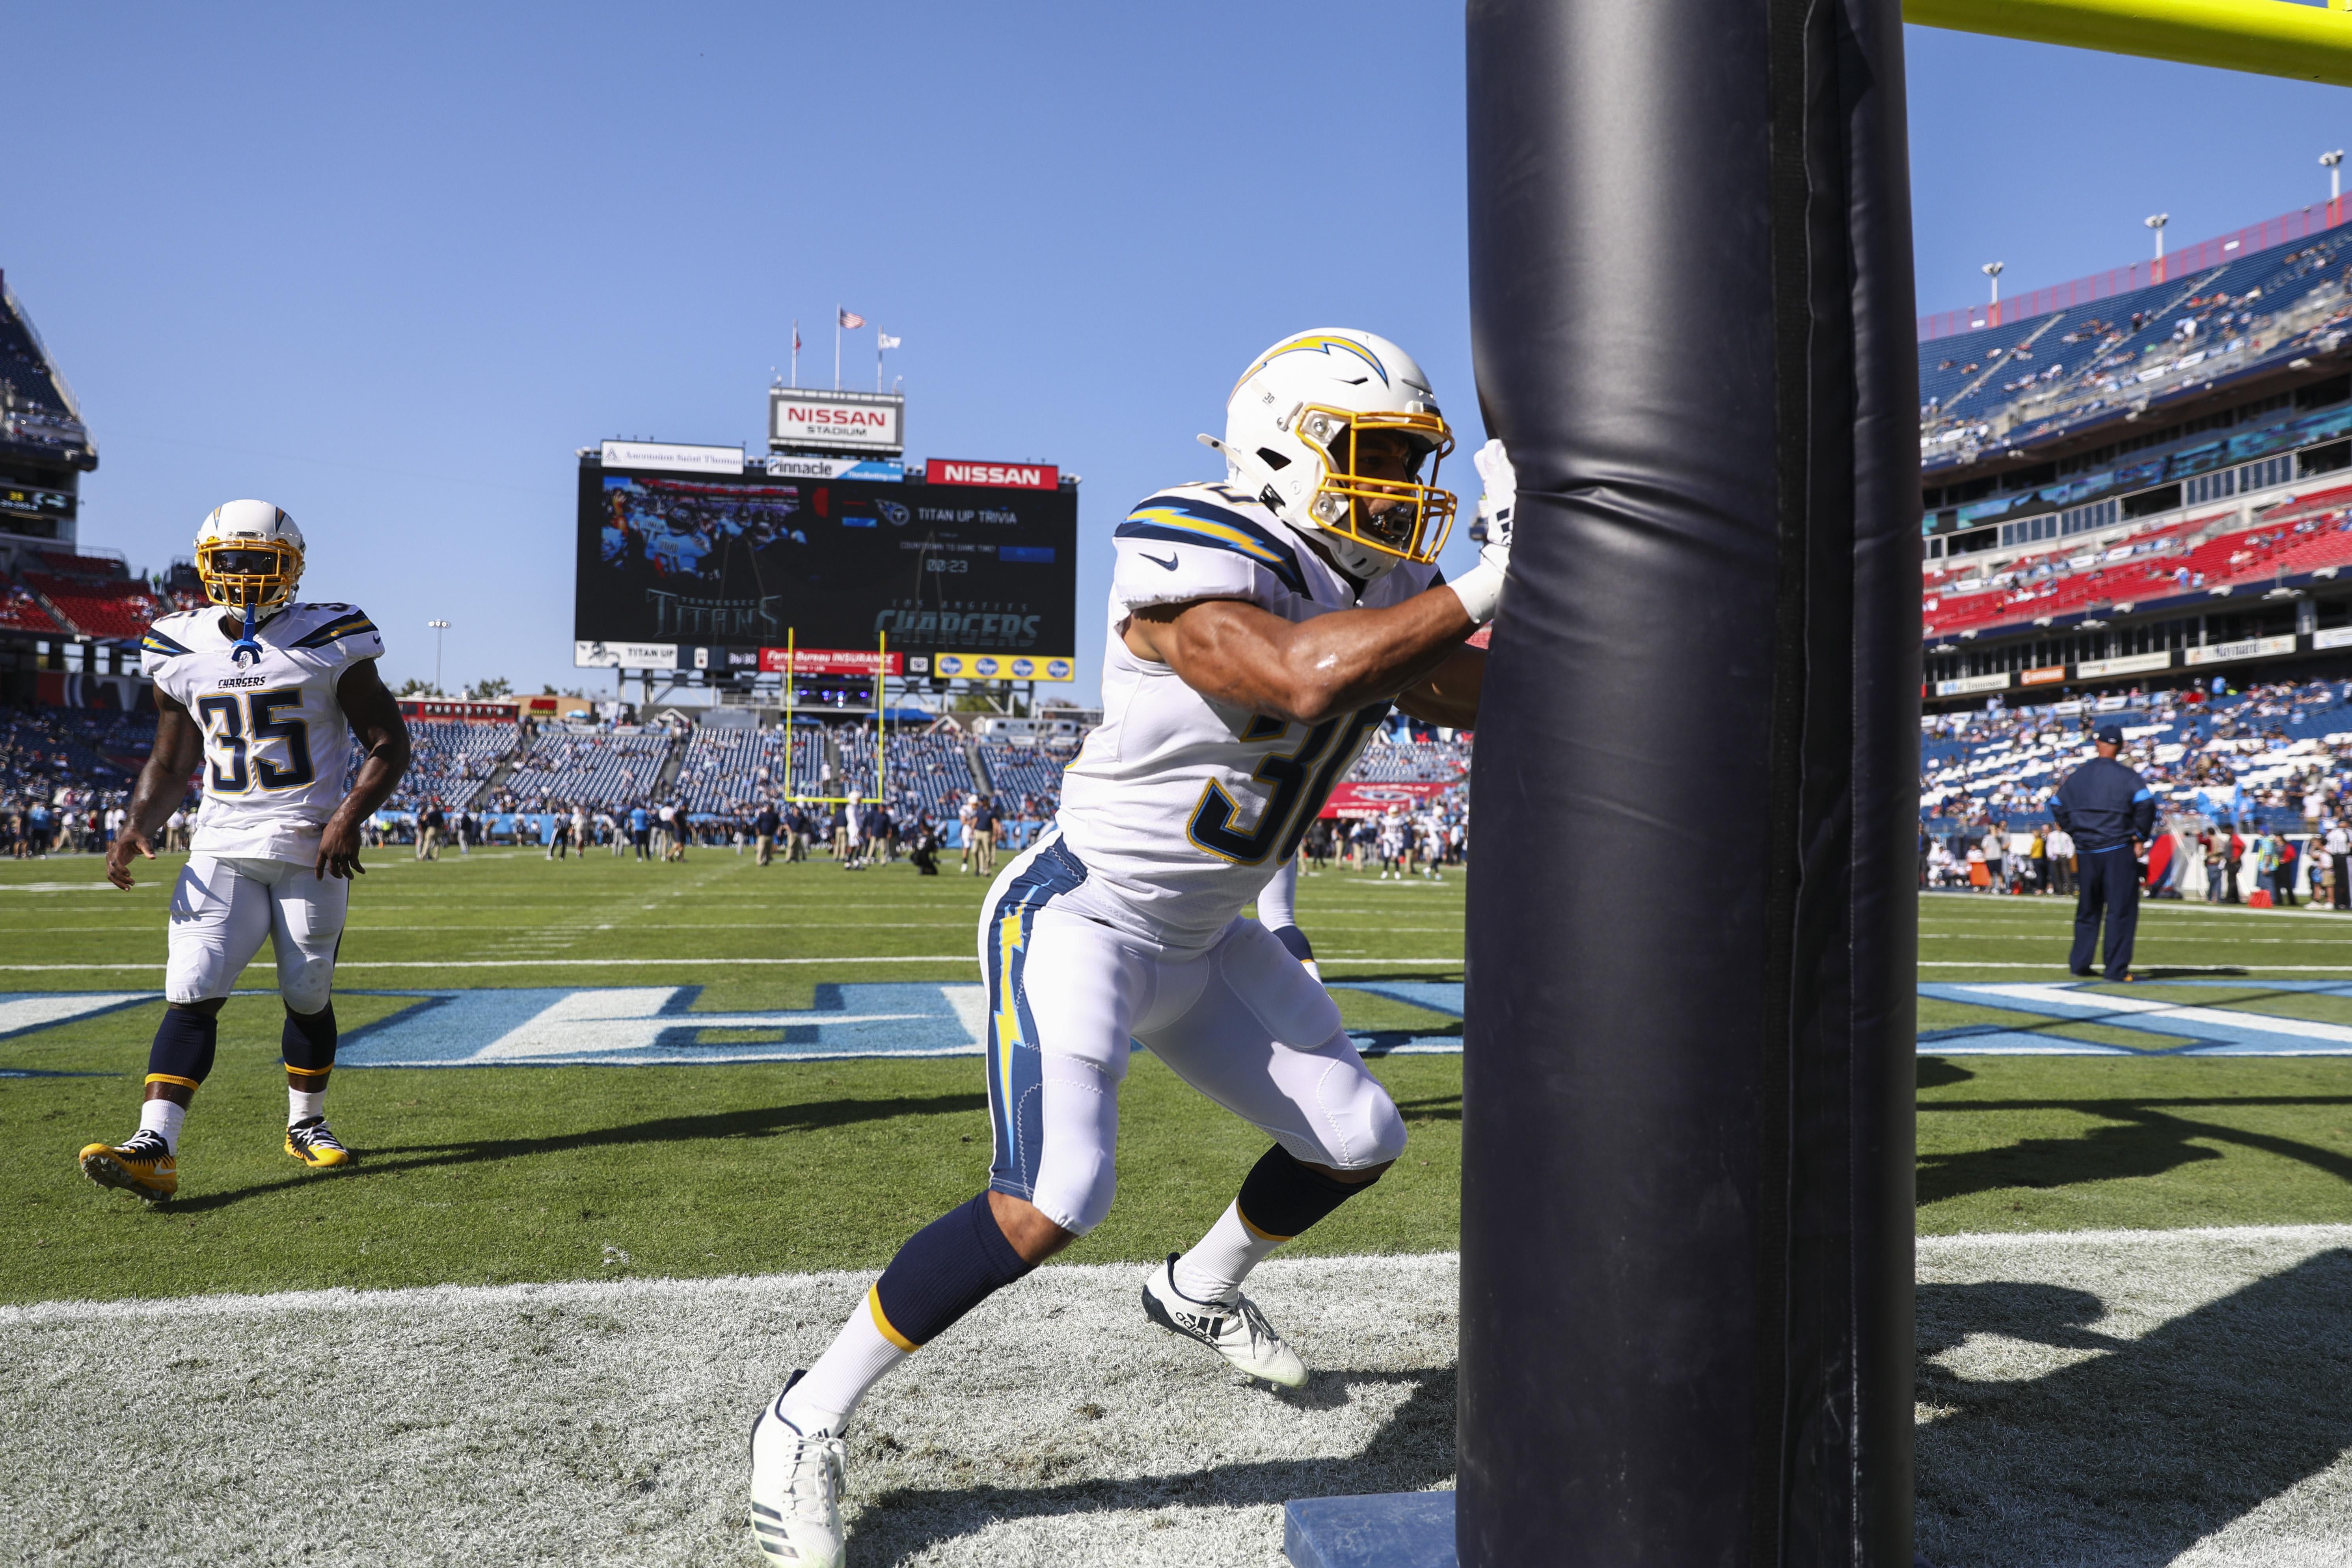 NASHVILLE, TENNESSEE - OCTOBER 20: Austin Ekeler #30 of the Los Angeles Chargers warms up on the field before the game against the Tennessee Titans at Nissan Stadium on October 20, 2019 in Nashville, Tennessee. (Photo by Silas Walker/Getty Images)